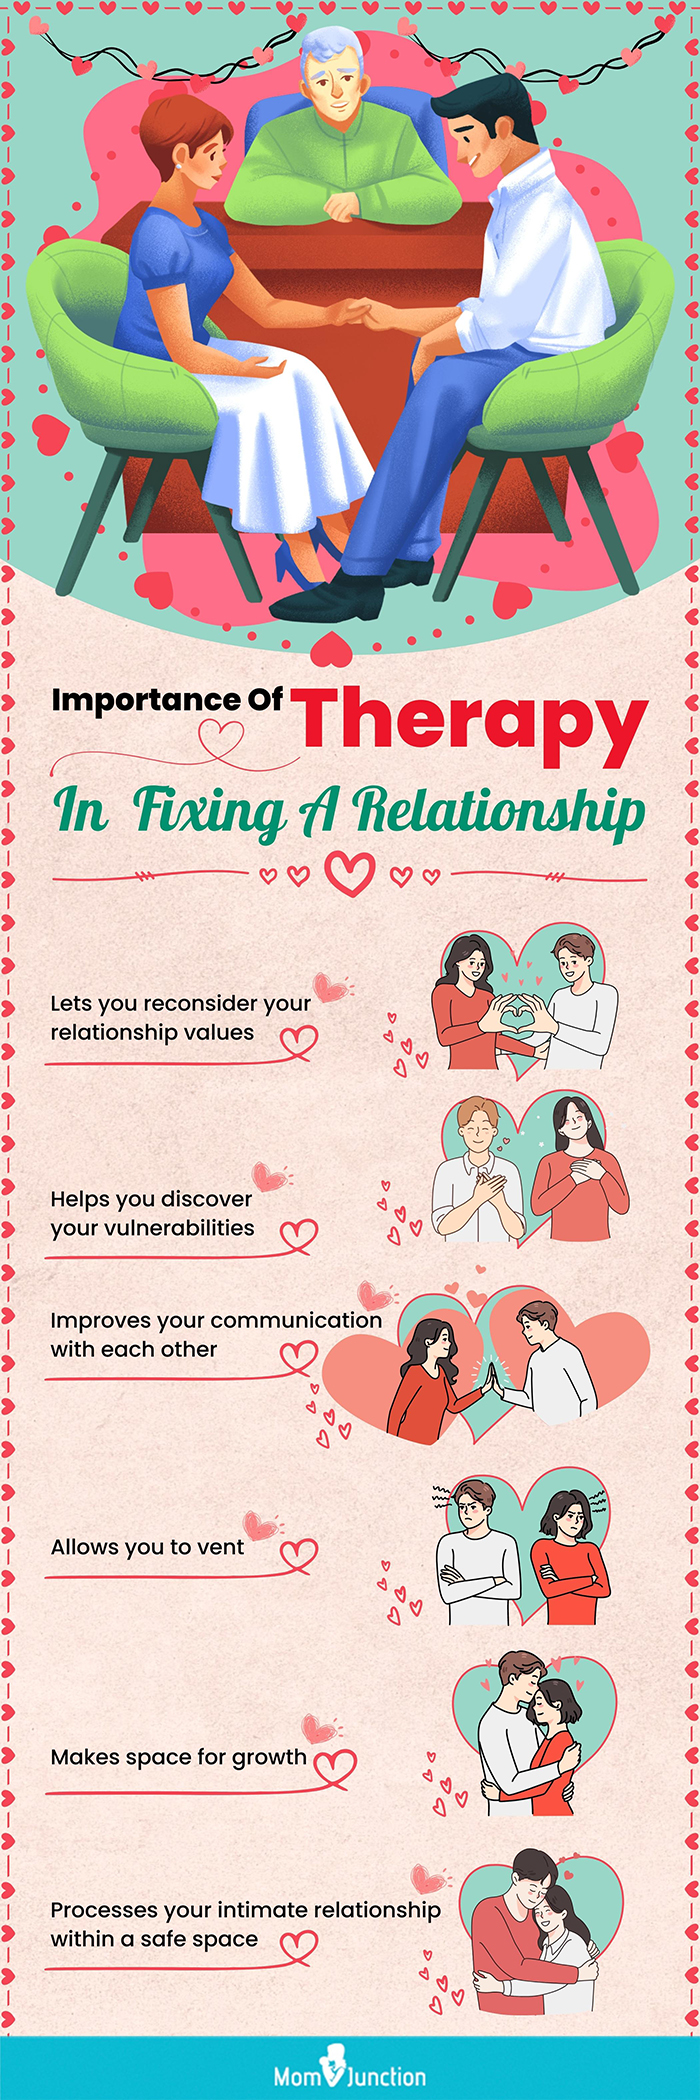 importance of therapy in fixing a relationship (infographic)